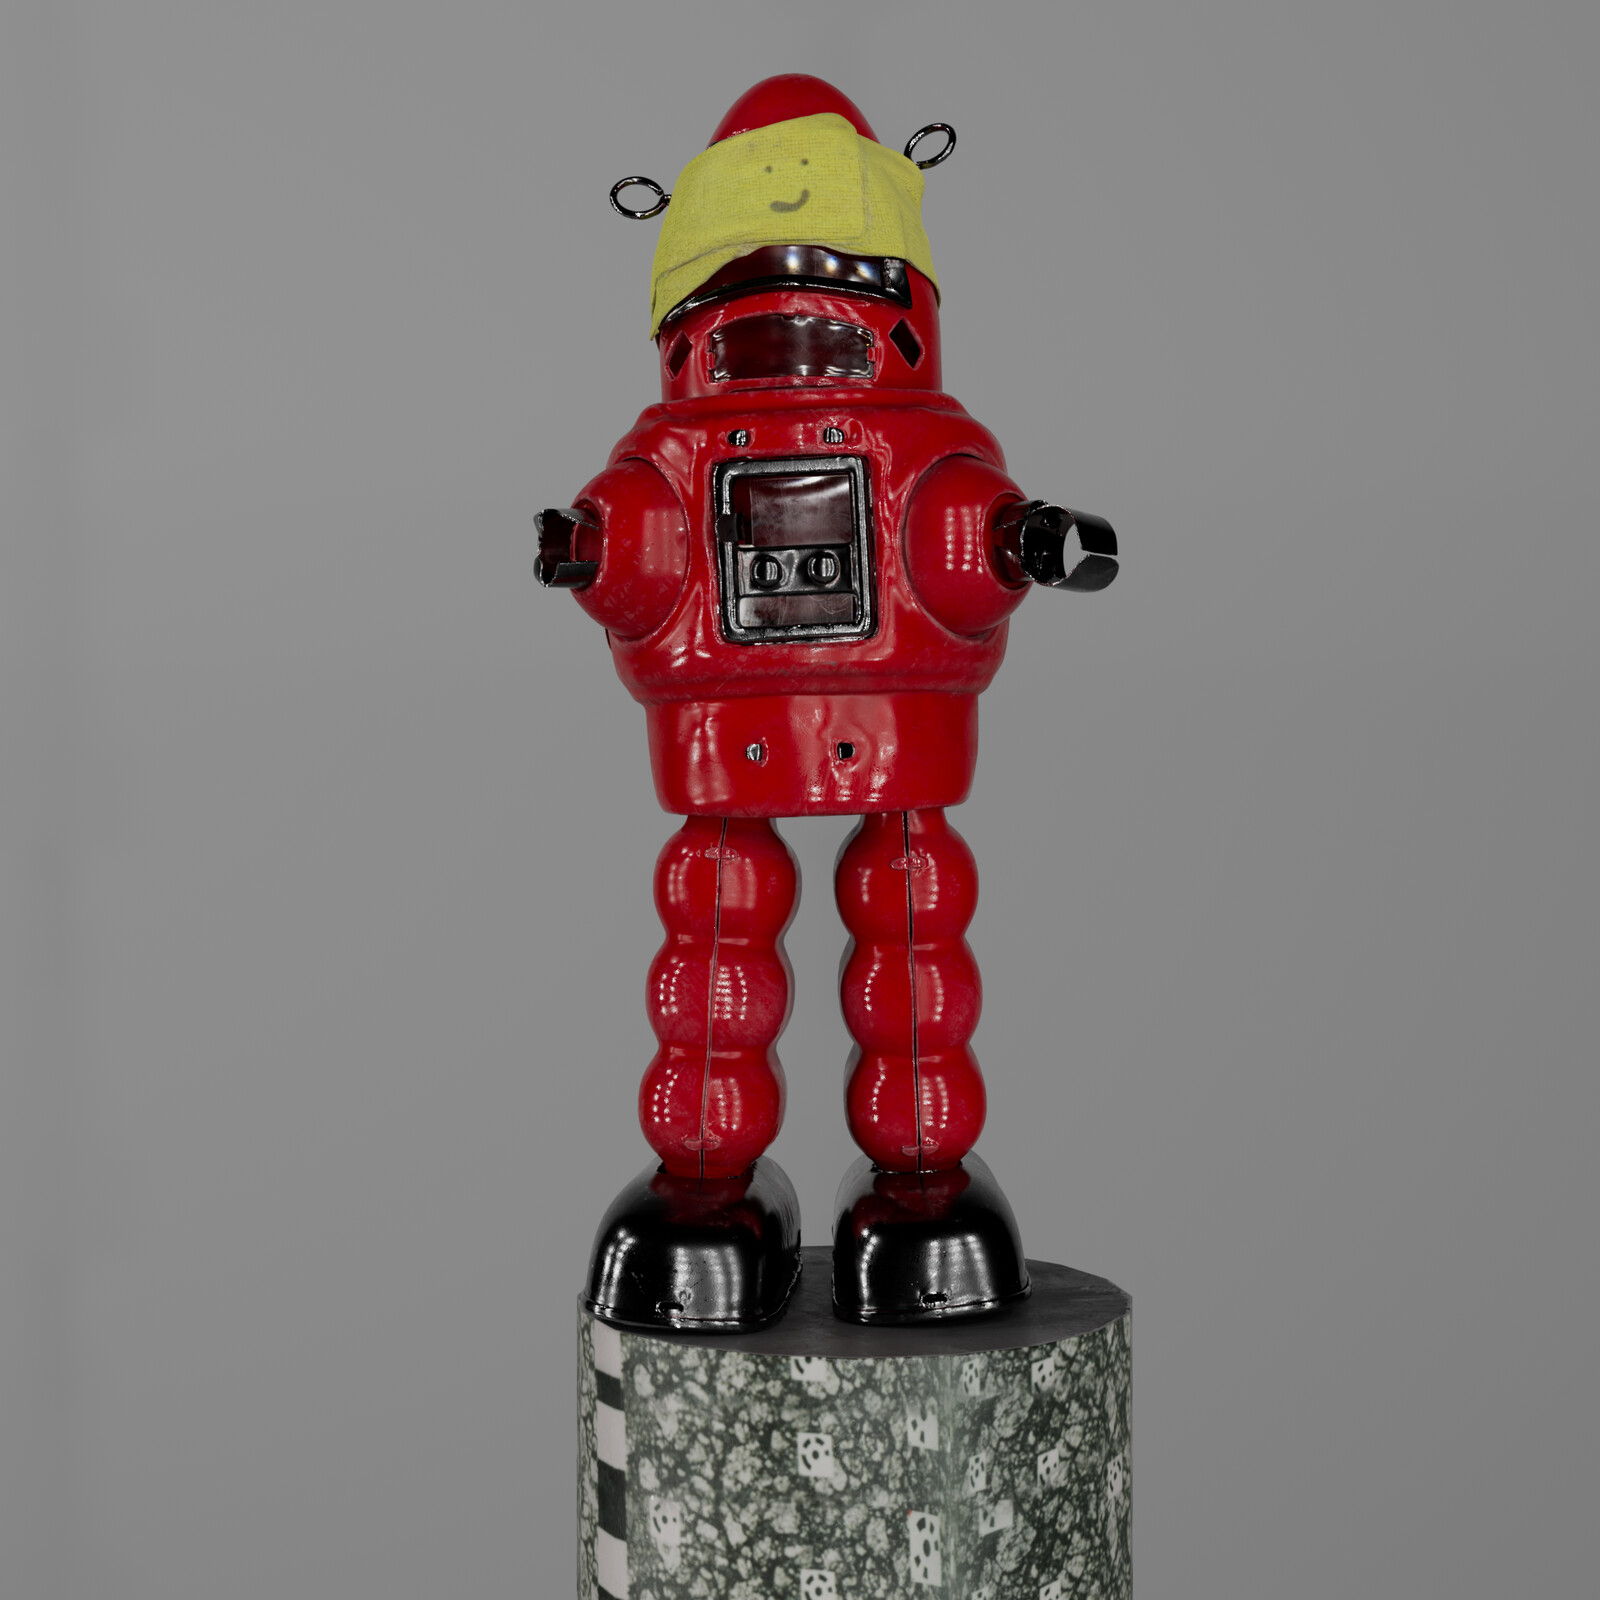 The Red Robot